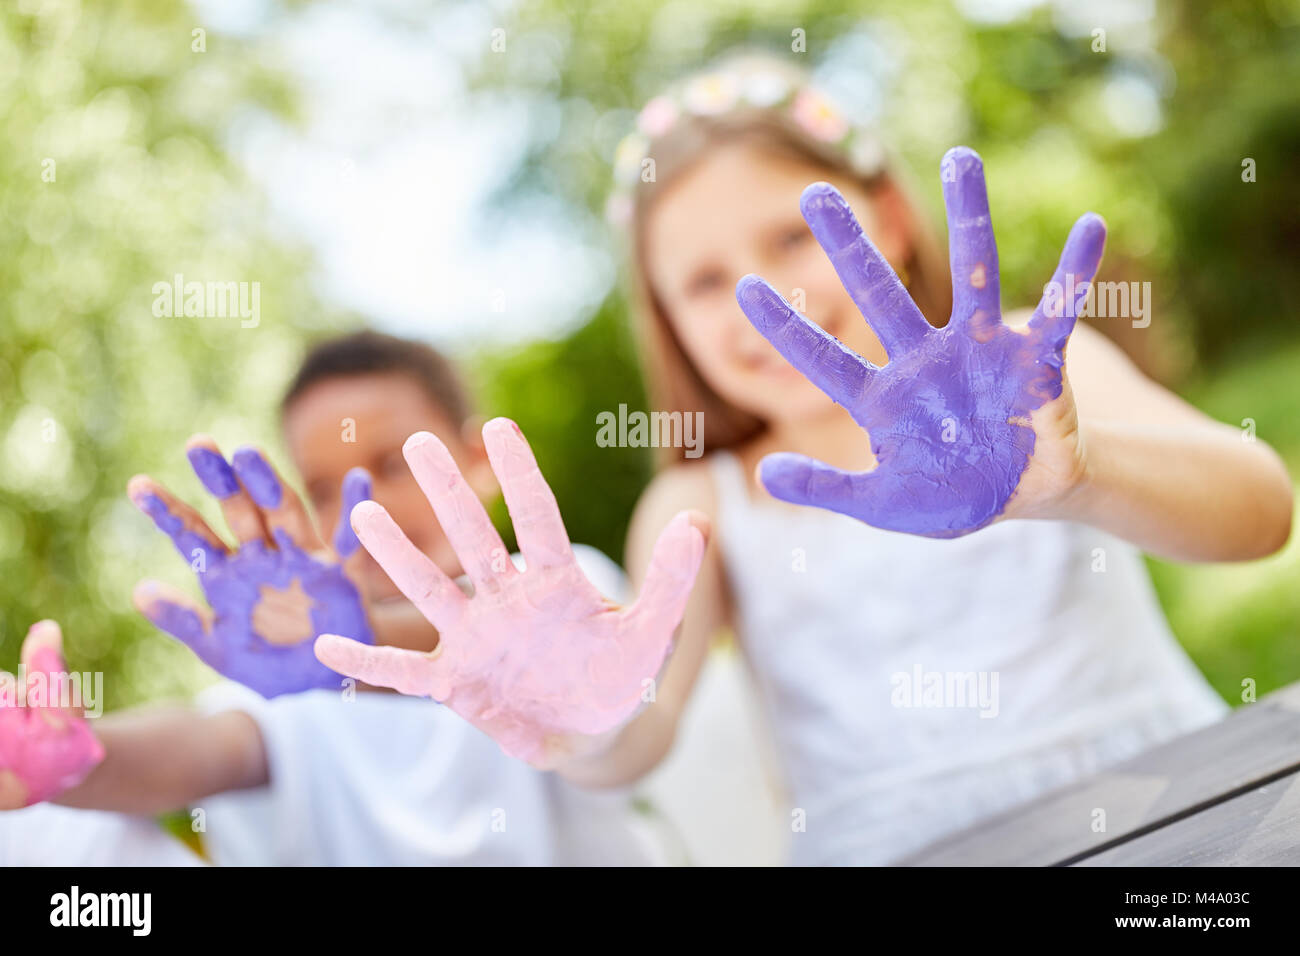 Children show their smeared hands while painting with finger paints Stock Photo